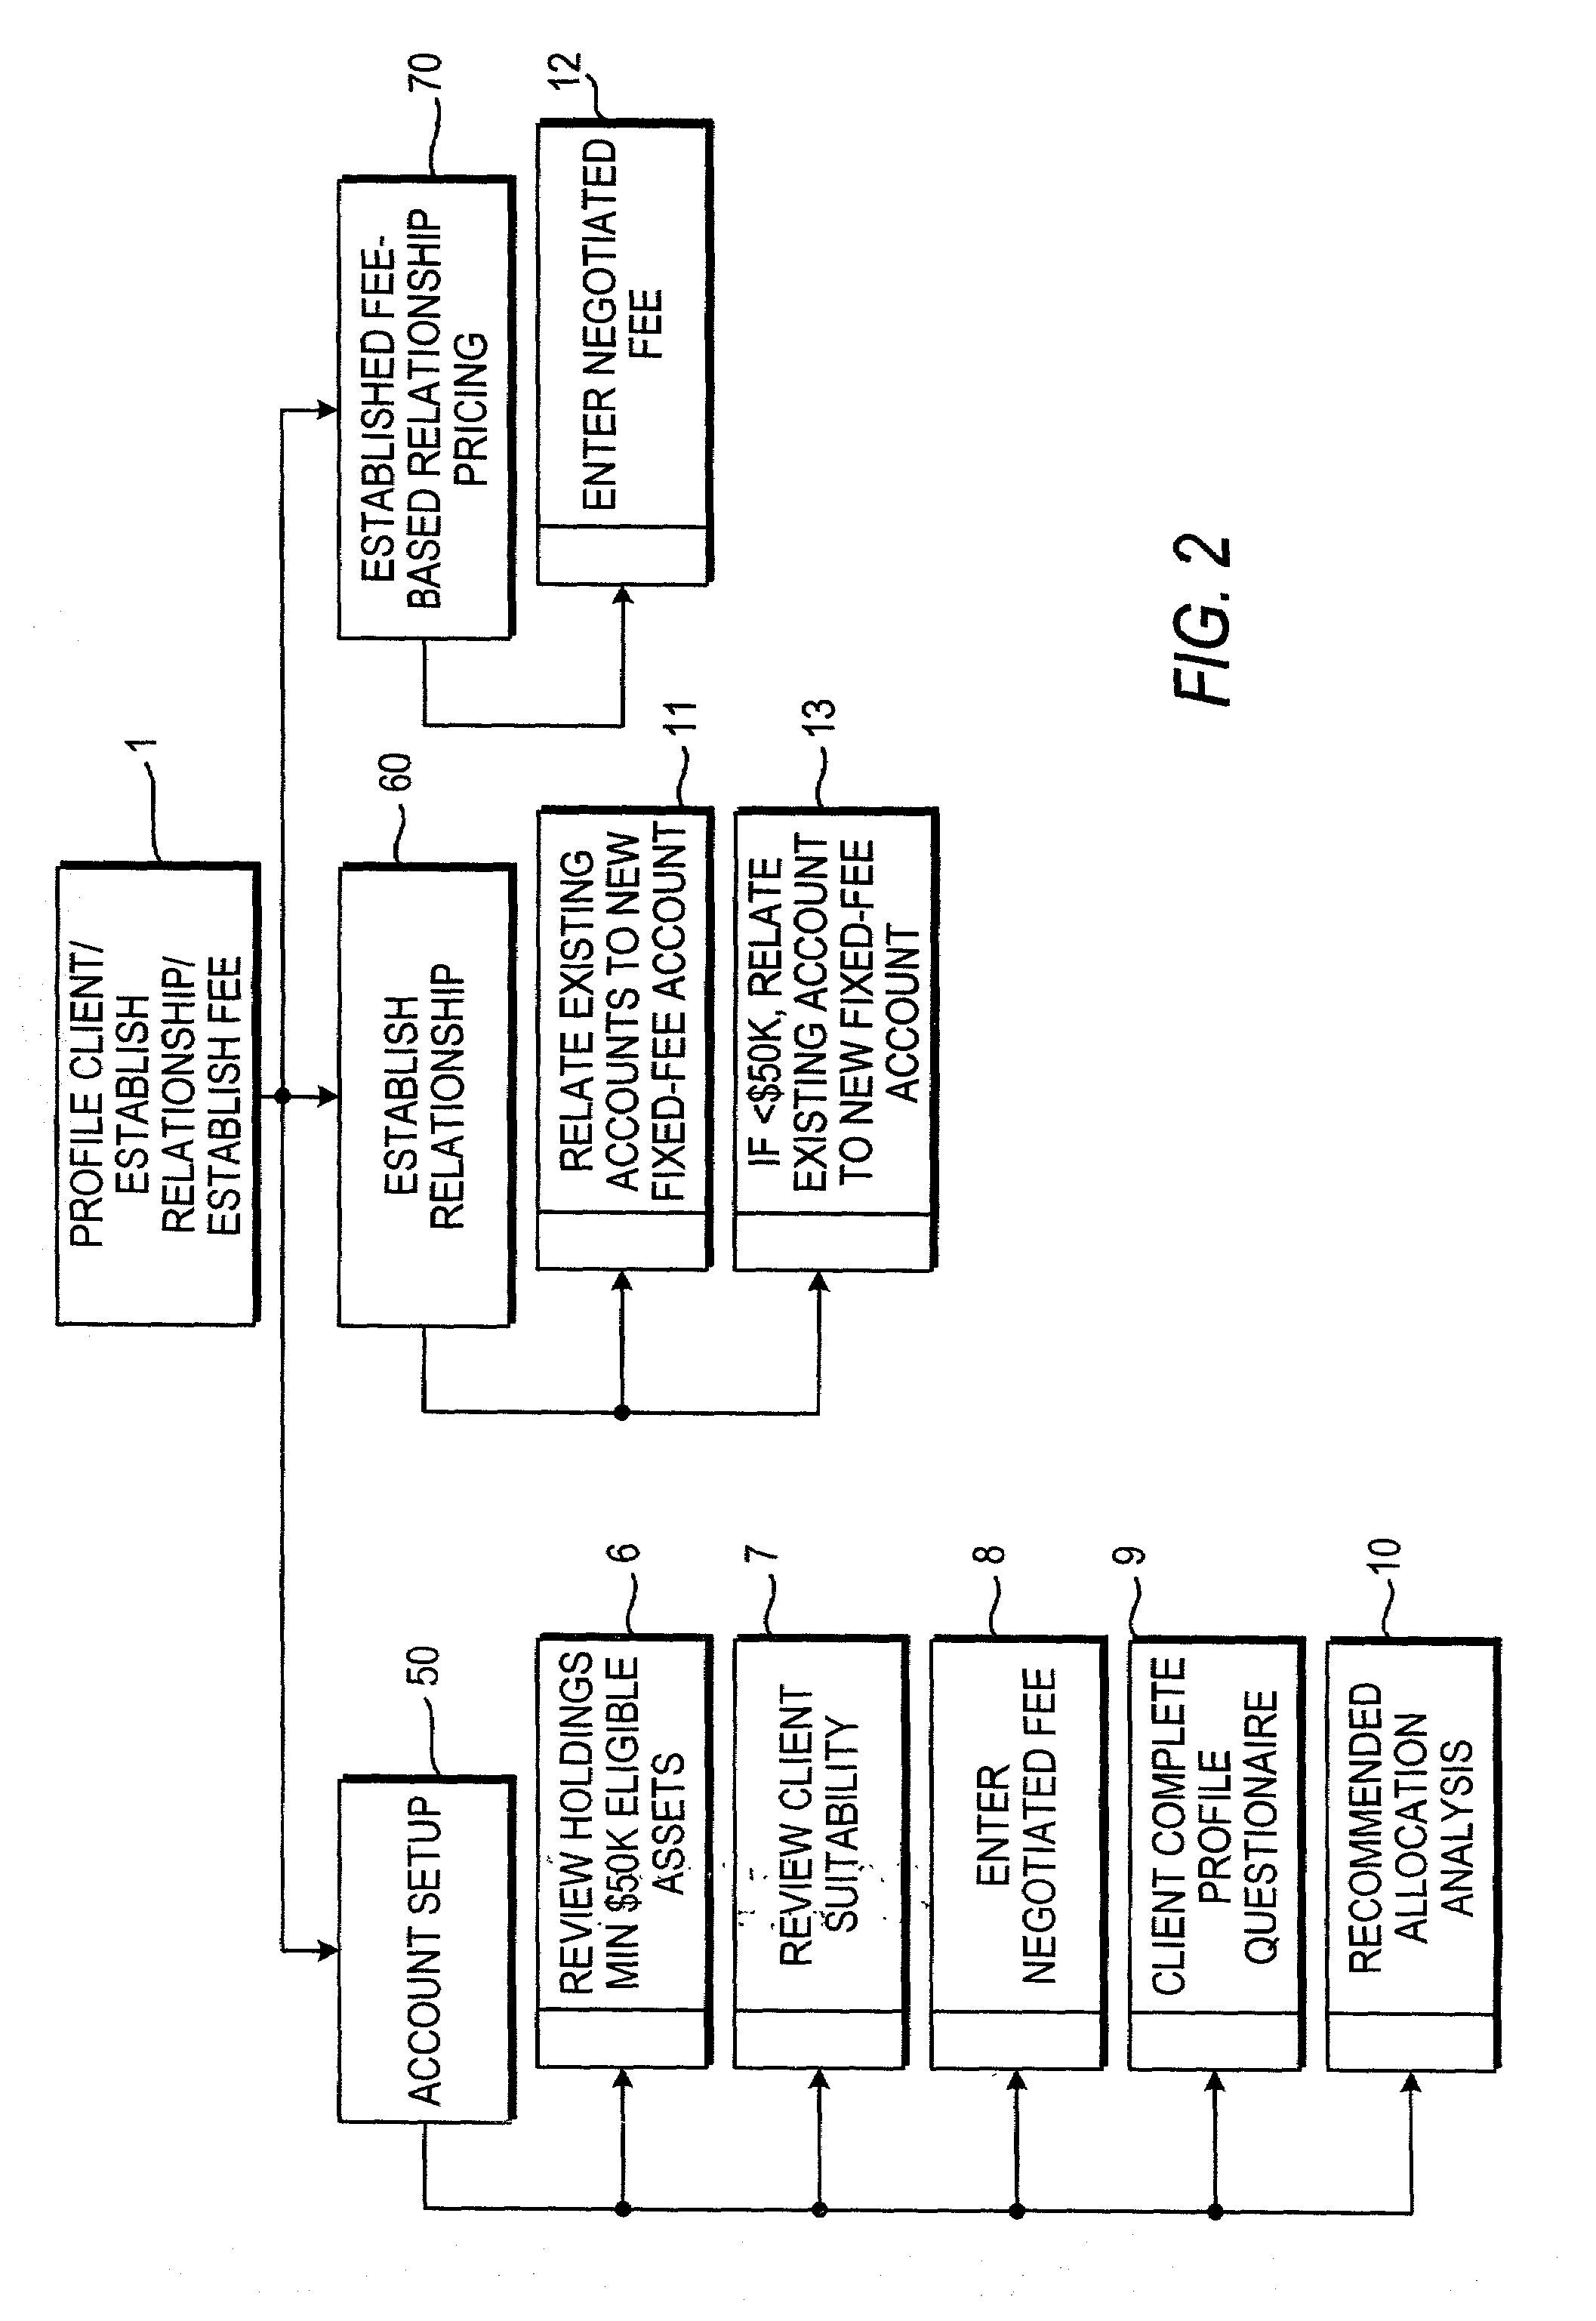 Systems, apparatus and methods for establishing a flat fee brokerage account system